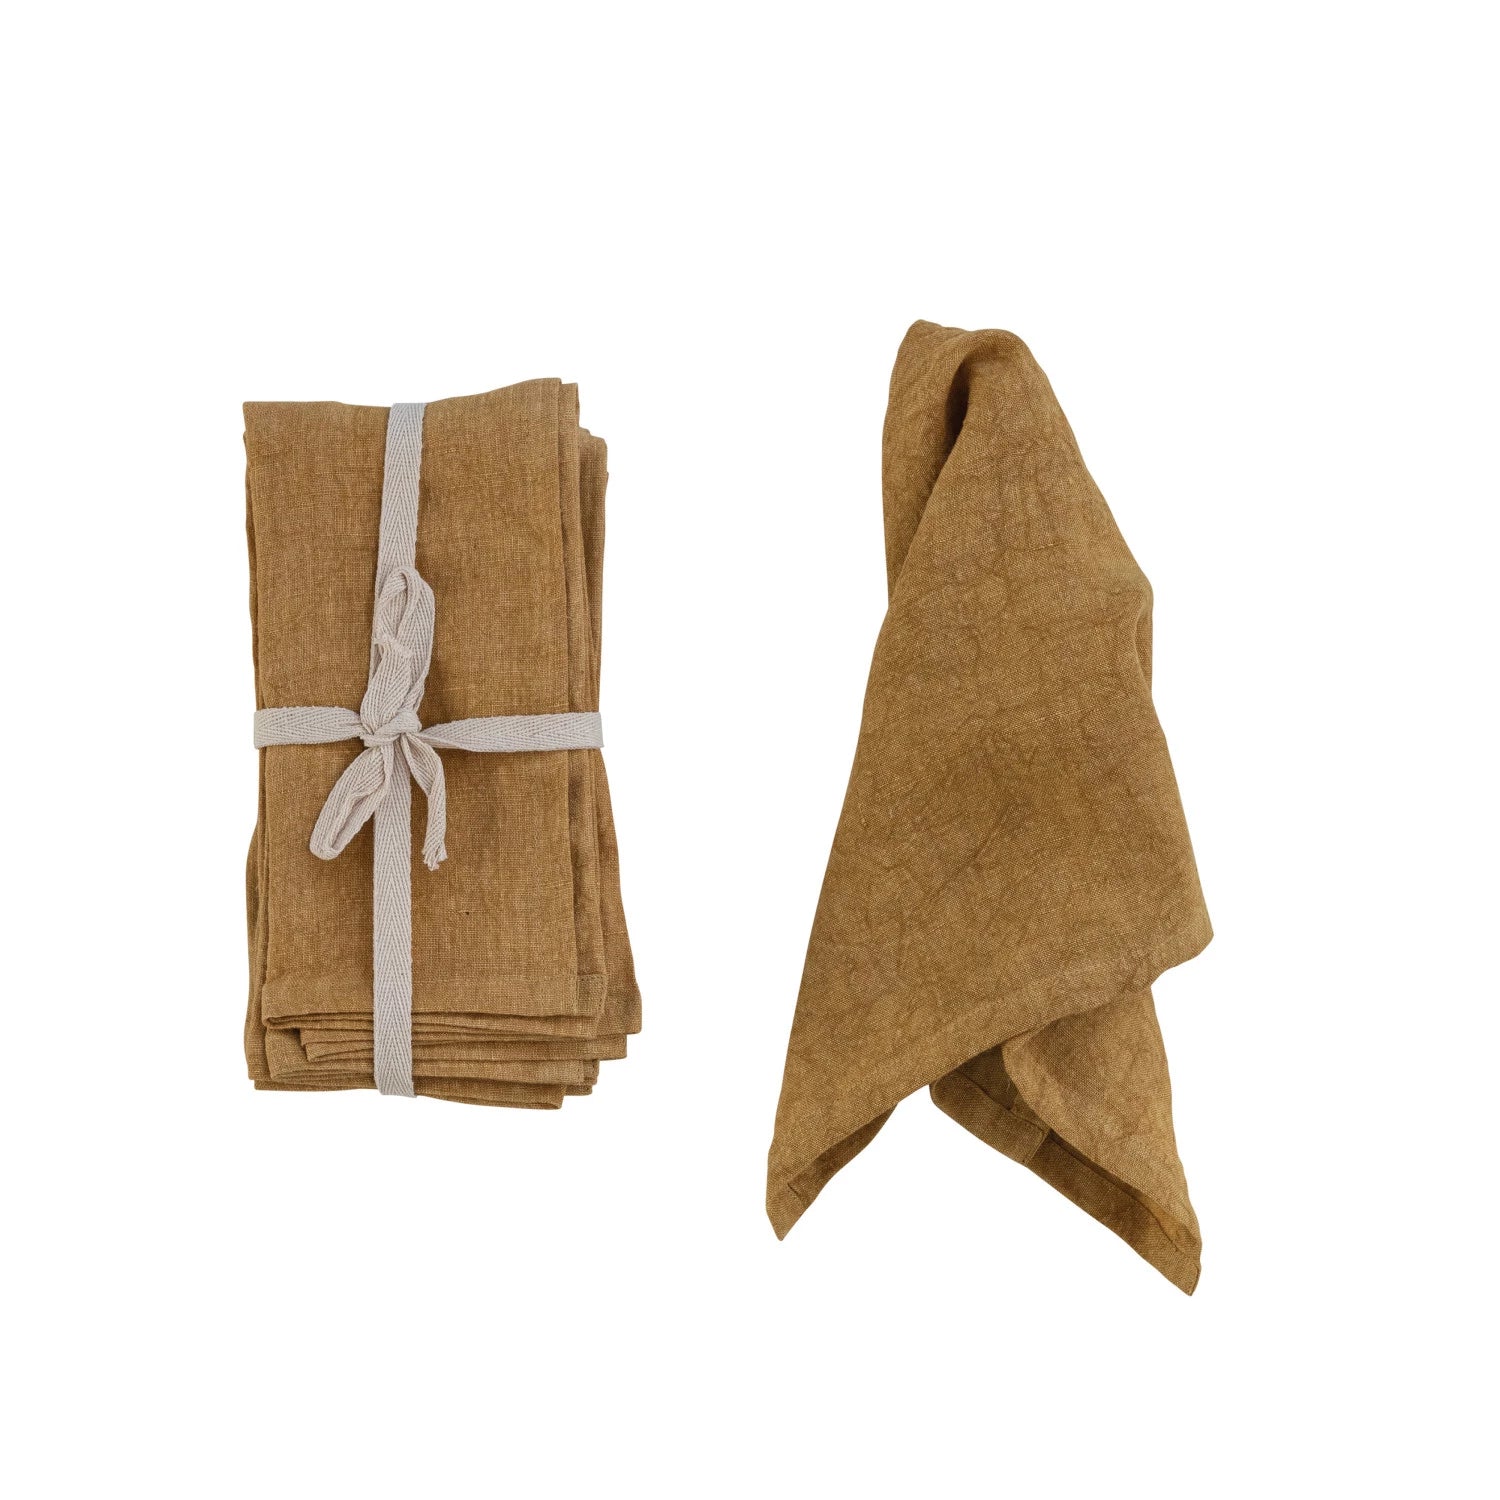 View Creative Co-op - Stonewashed Linen Napkins, Mustard